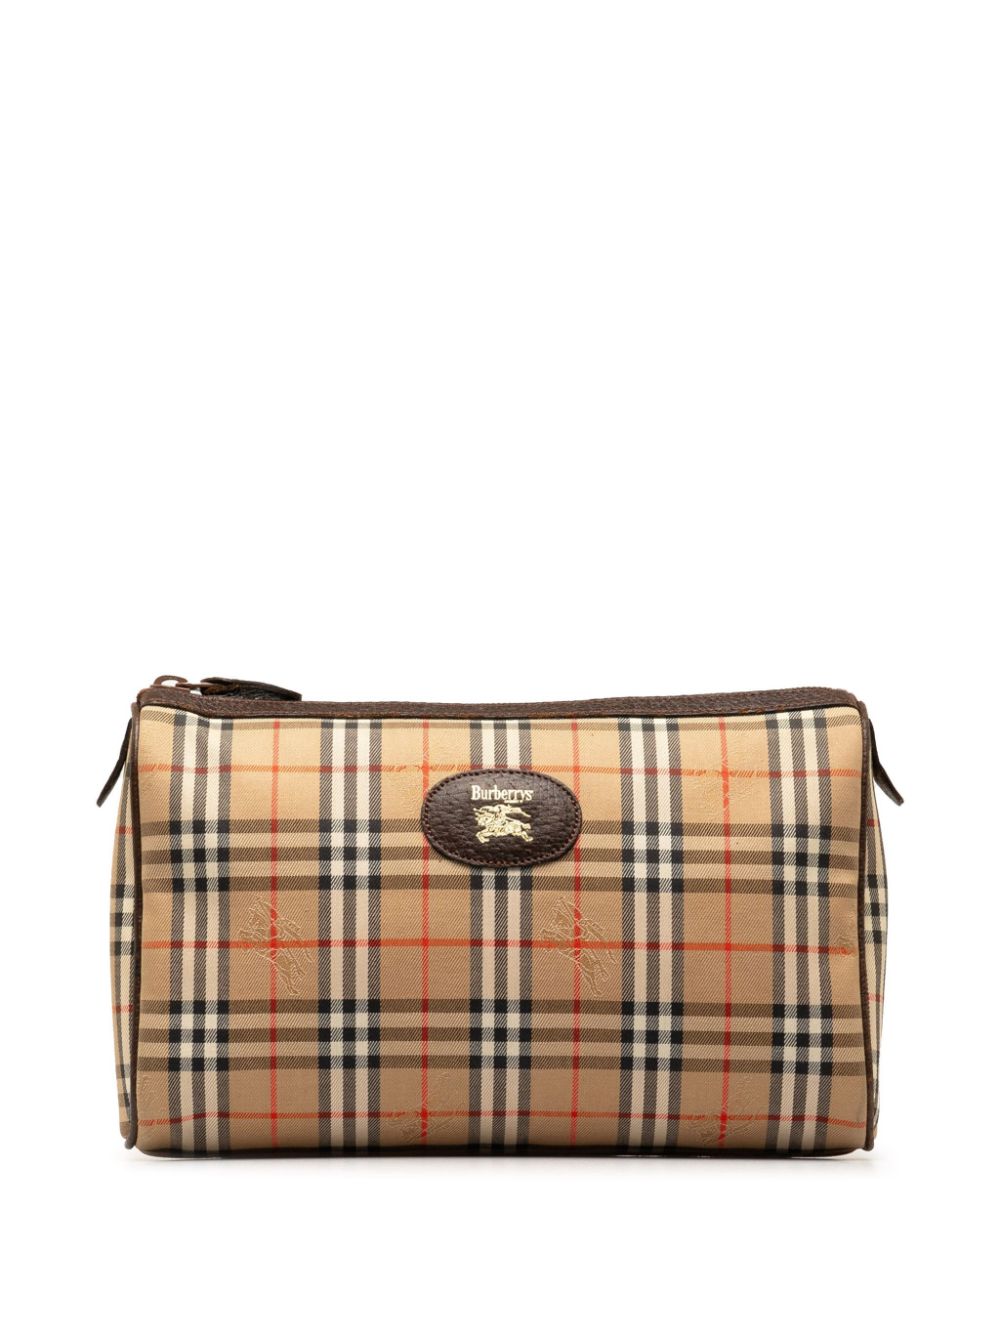 Pre-owned Burberry Haymarket Check 手拿包（1900年代典藏款） In Brown